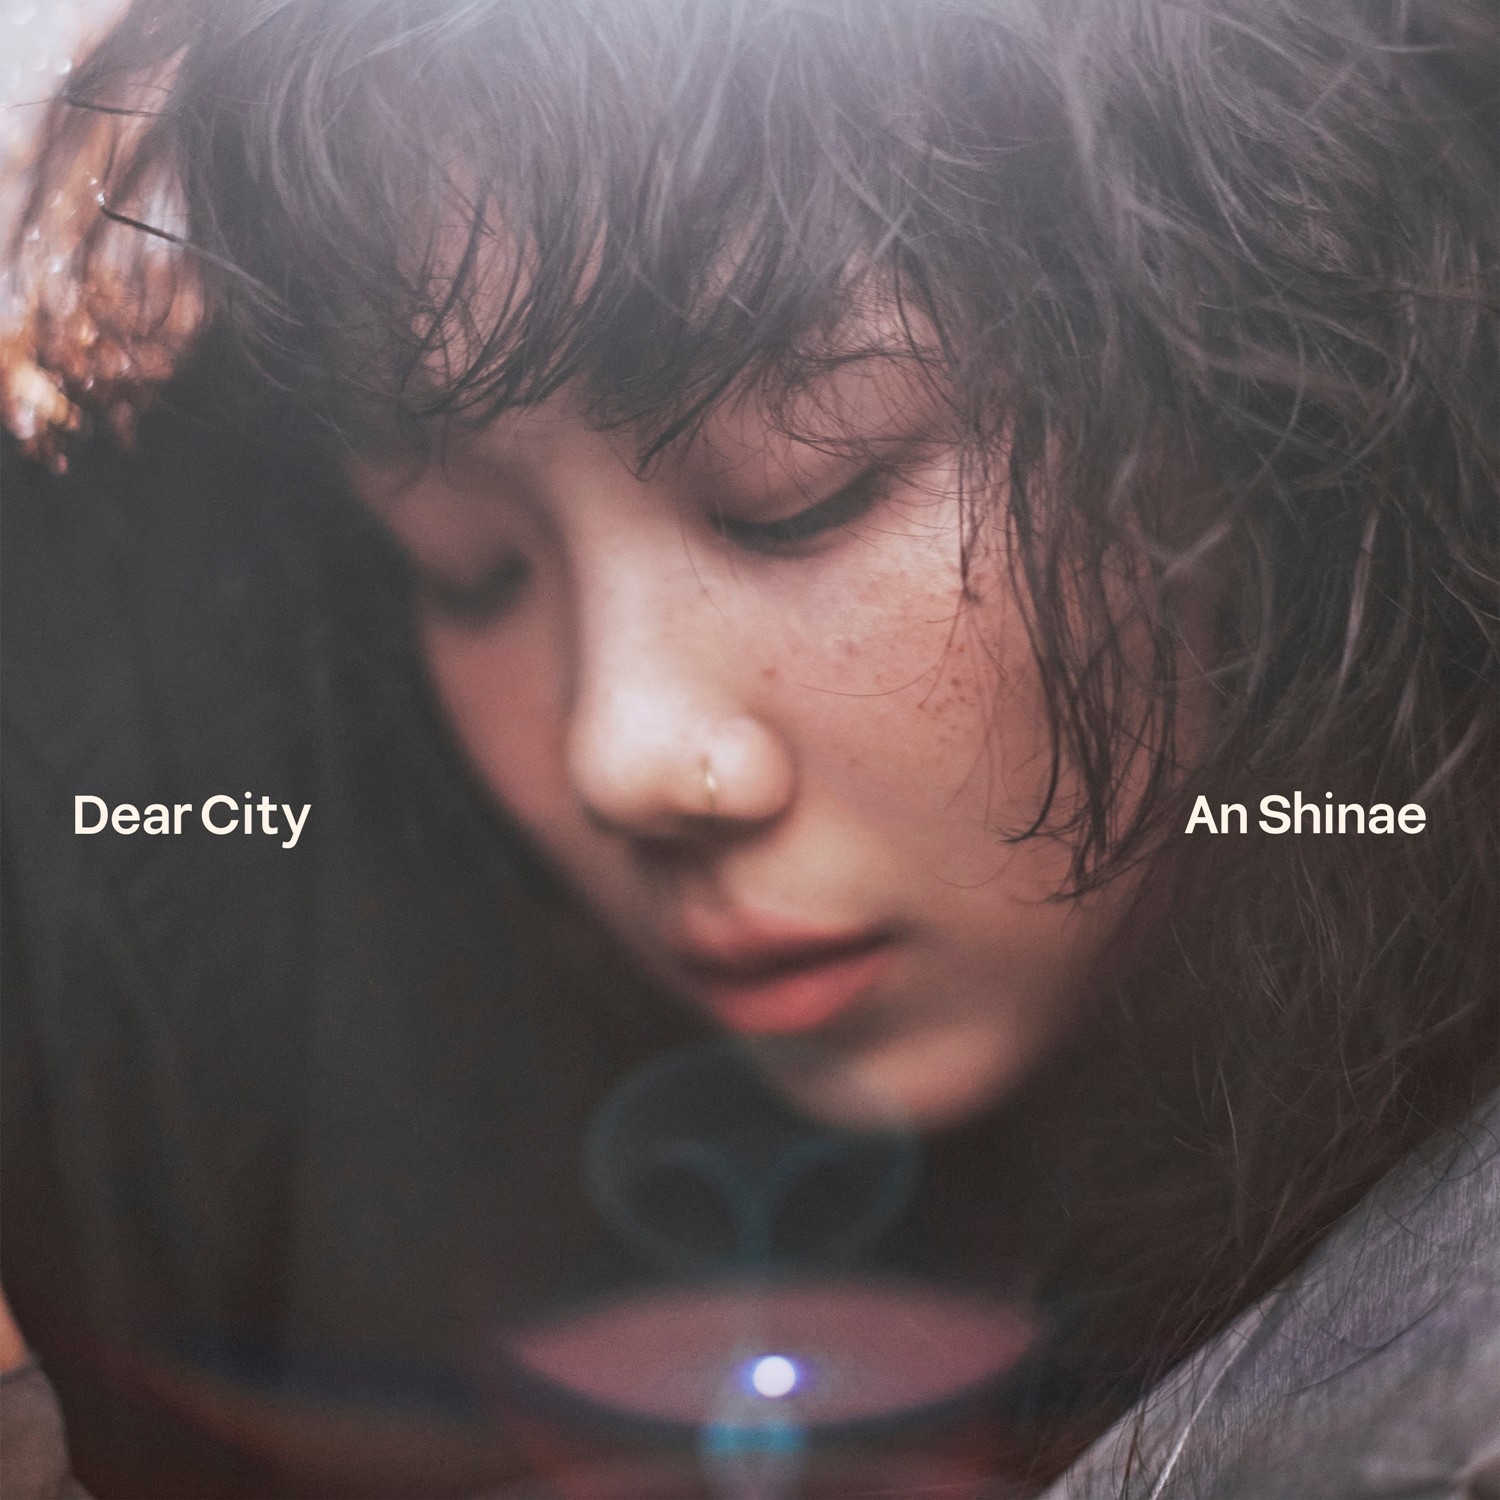 “May It Be a Small Comfort and Consolation”…An Shin Ae Releases ‘Dear City’ on the 3rd